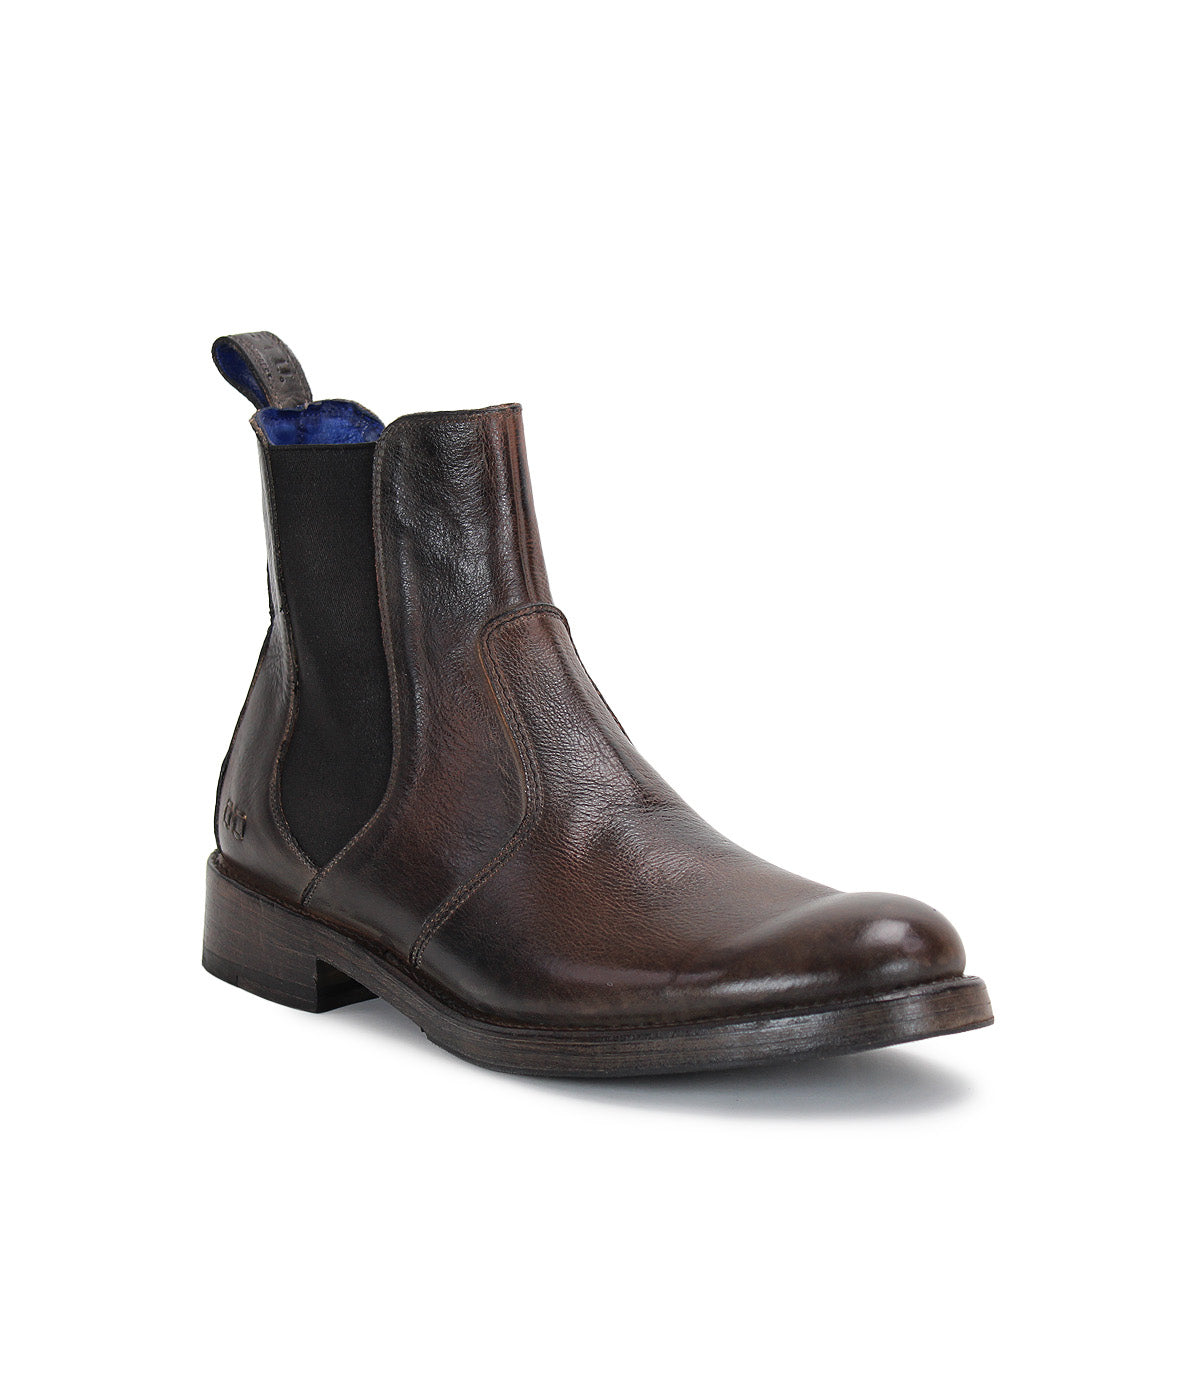 Classic men's leather Nando Chelsea boots by Bed Stu.